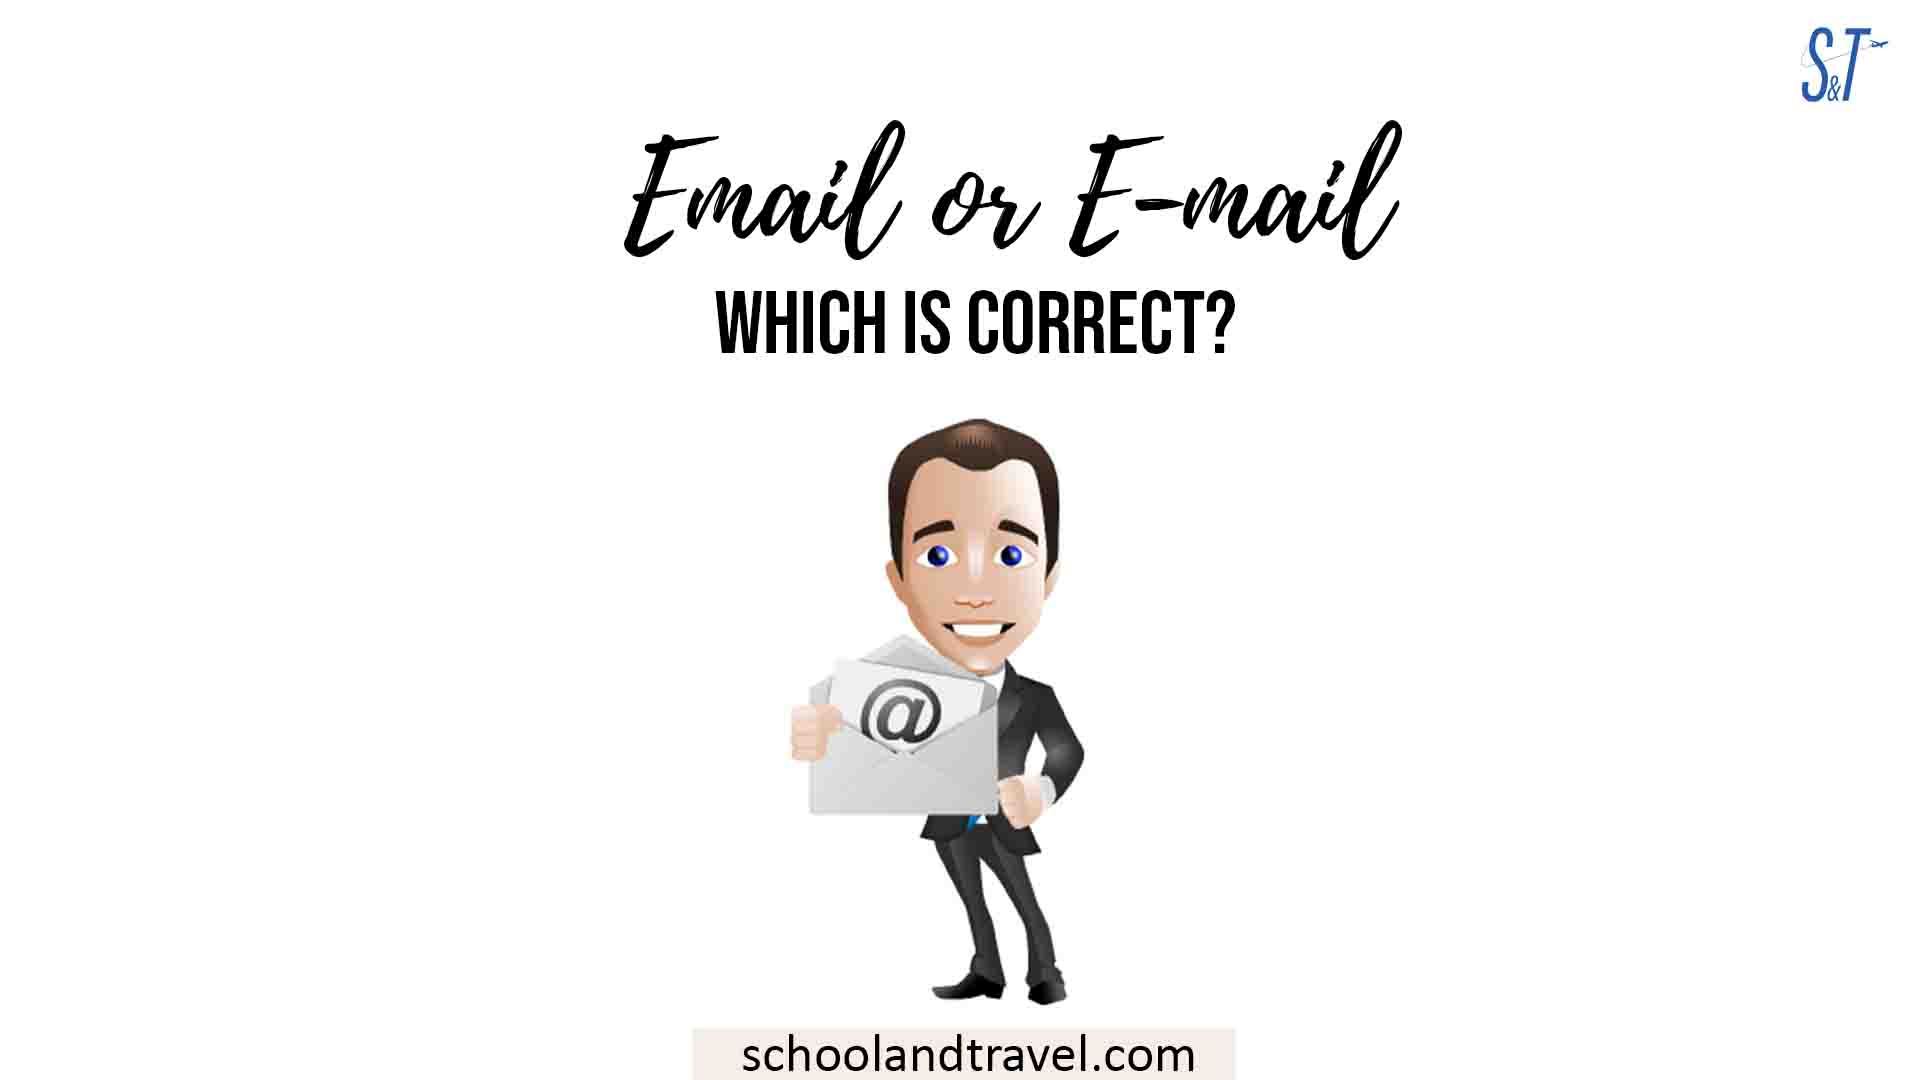 Email or E-mail